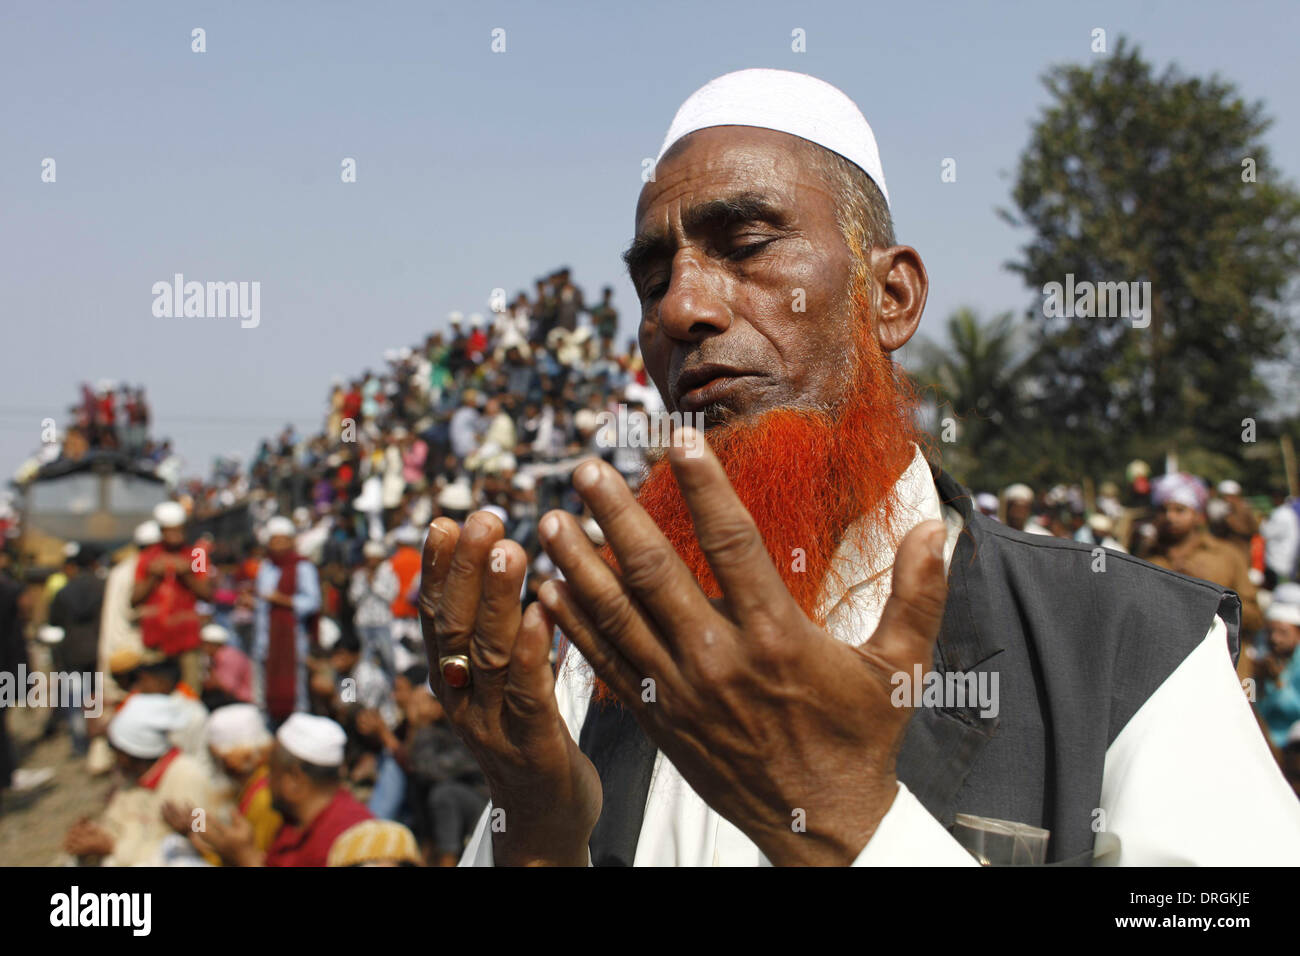 Dhaka,Bangladeshi Muslim devotees attend the Akheri Munajat concluding prayers on the third day of Biswa Ijtema, the second largest Muslim congregation after the Hajj, at Tongi with more than two million Muslims from Bangladesh and abroad. The Biswa Ijtema, the world’s second largest religious gathering of Muslims concluded with the prayer of Akheri Munajat on the bank of river Turag. The event focuses on prayers and meditation and does not allow political discussion.  Thousands of Muslims joined the prayer at the Biswa Ijtema grounds and surrounding areas. Stock Photo